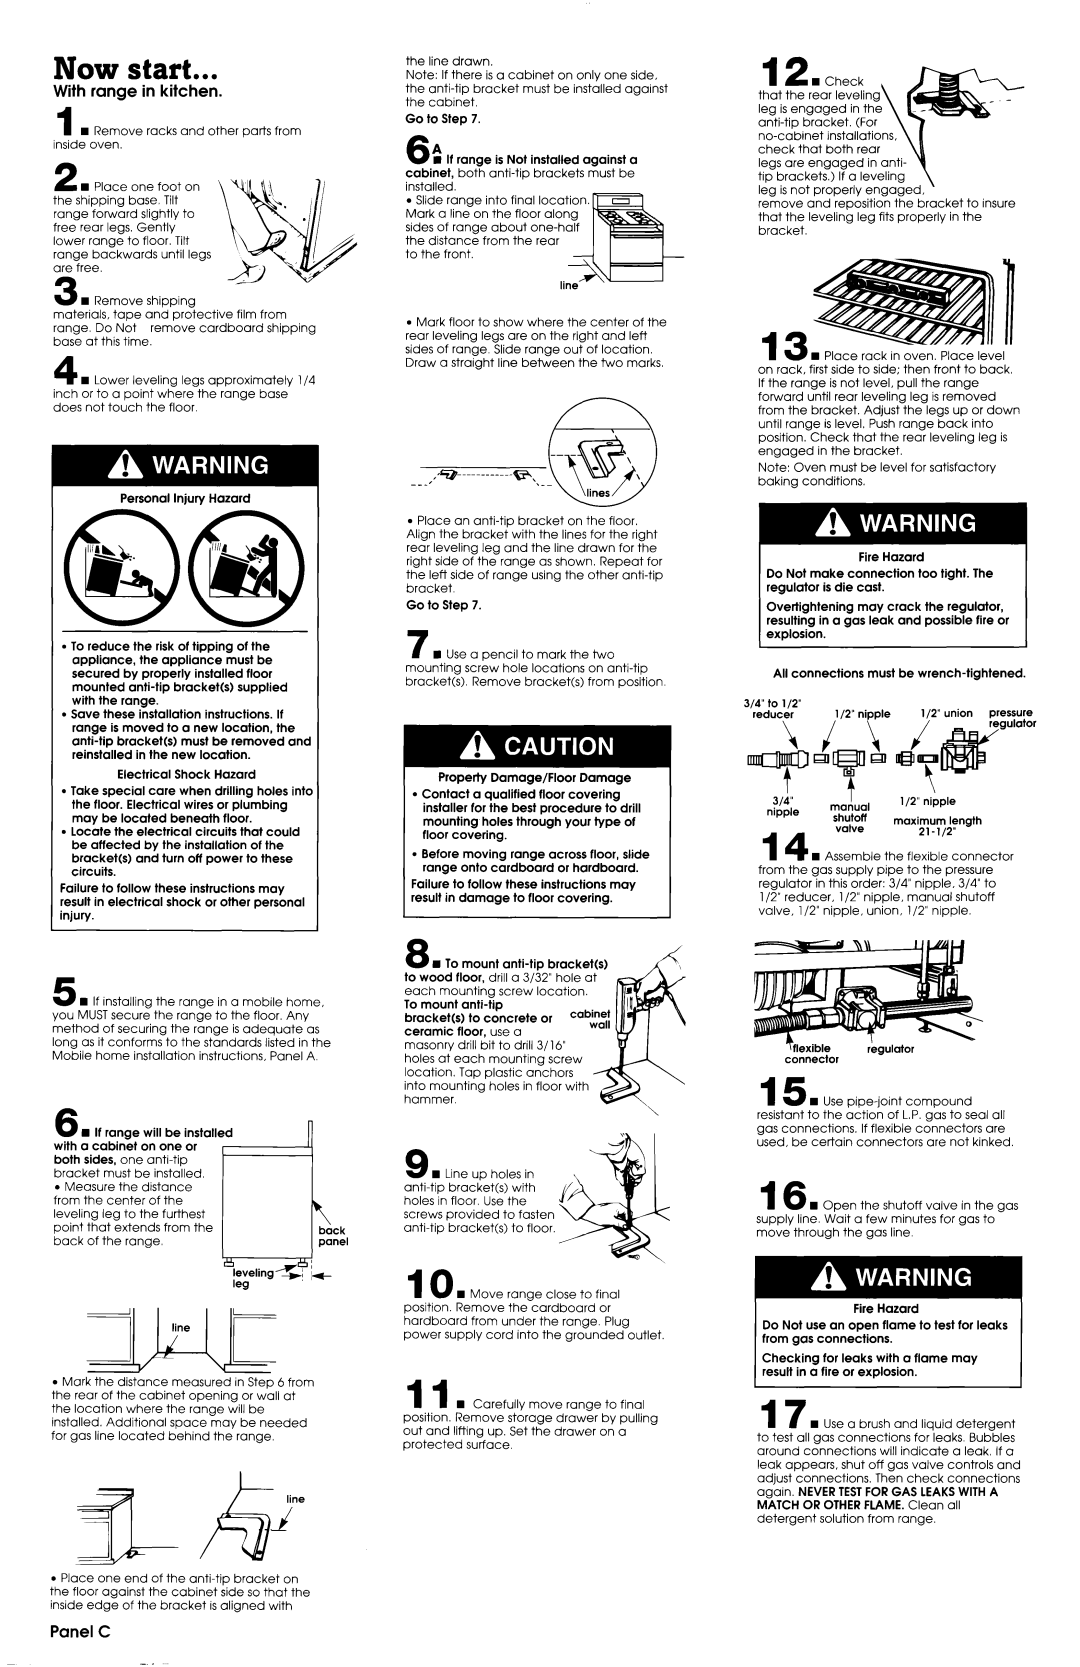 Whirlpool SF388PEWN0 installation instructions Now start, With range in kitchen, Panel C 